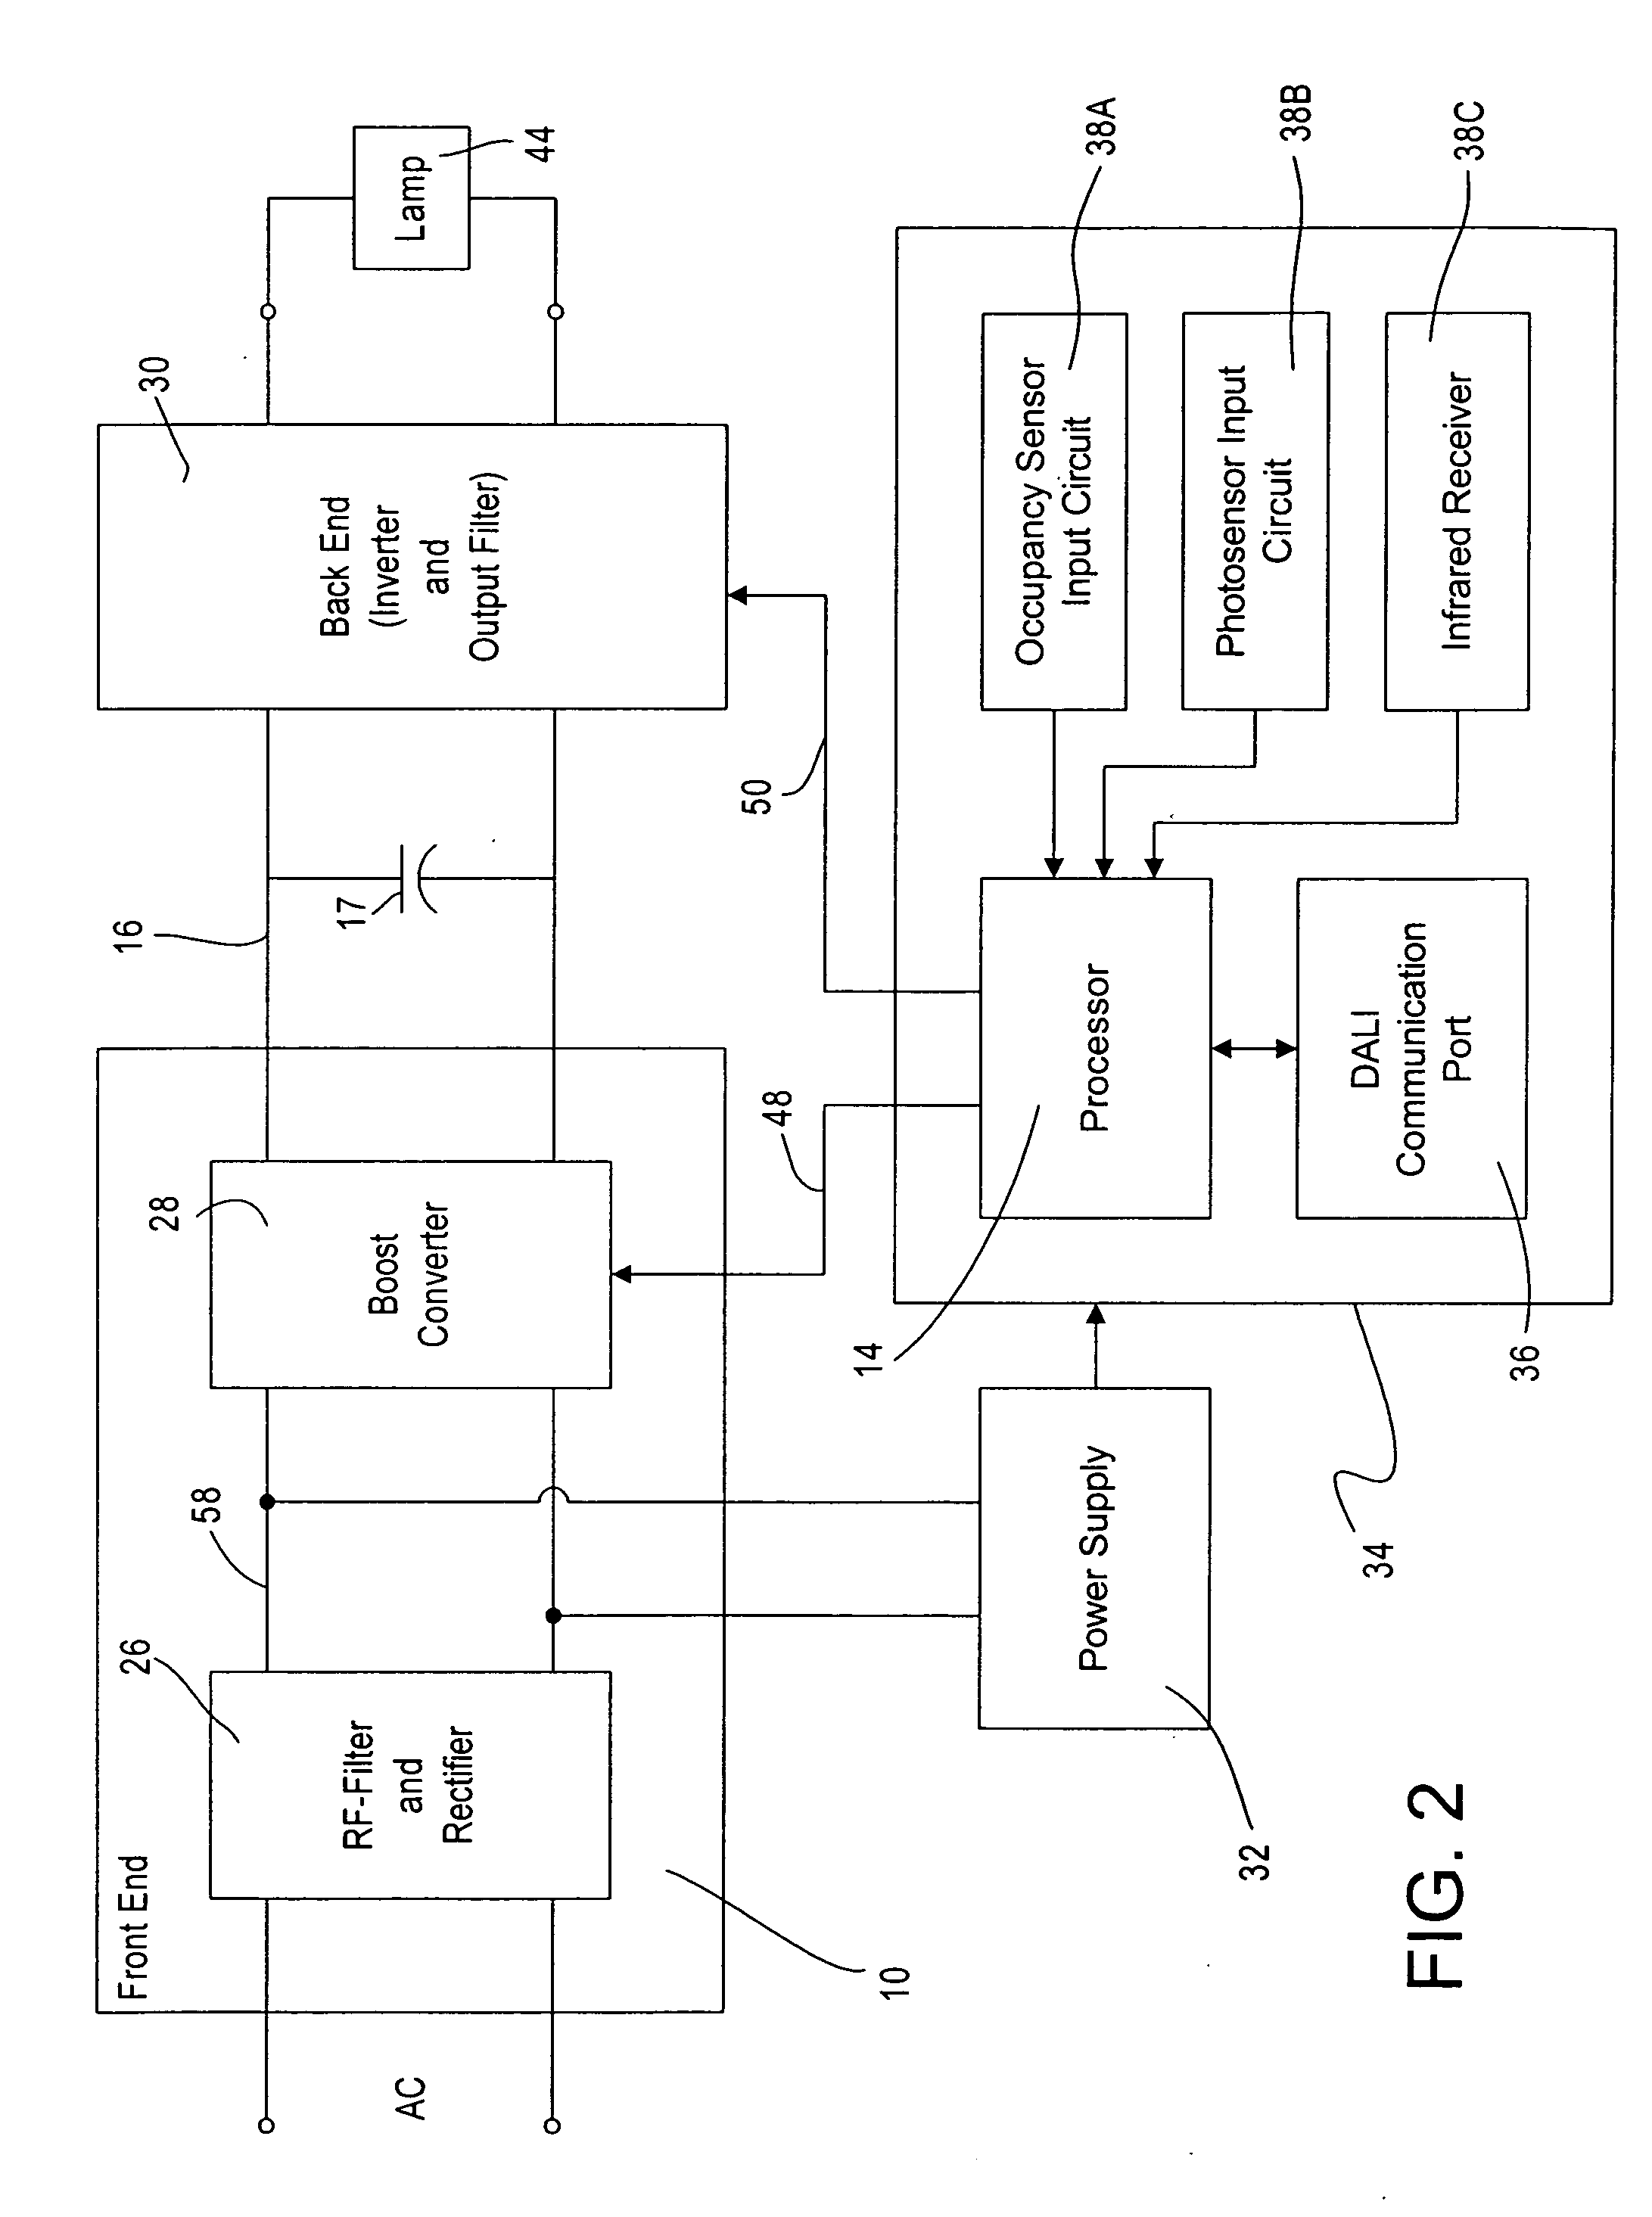 Distributed intelligence ballast system and extended lighting control protocol